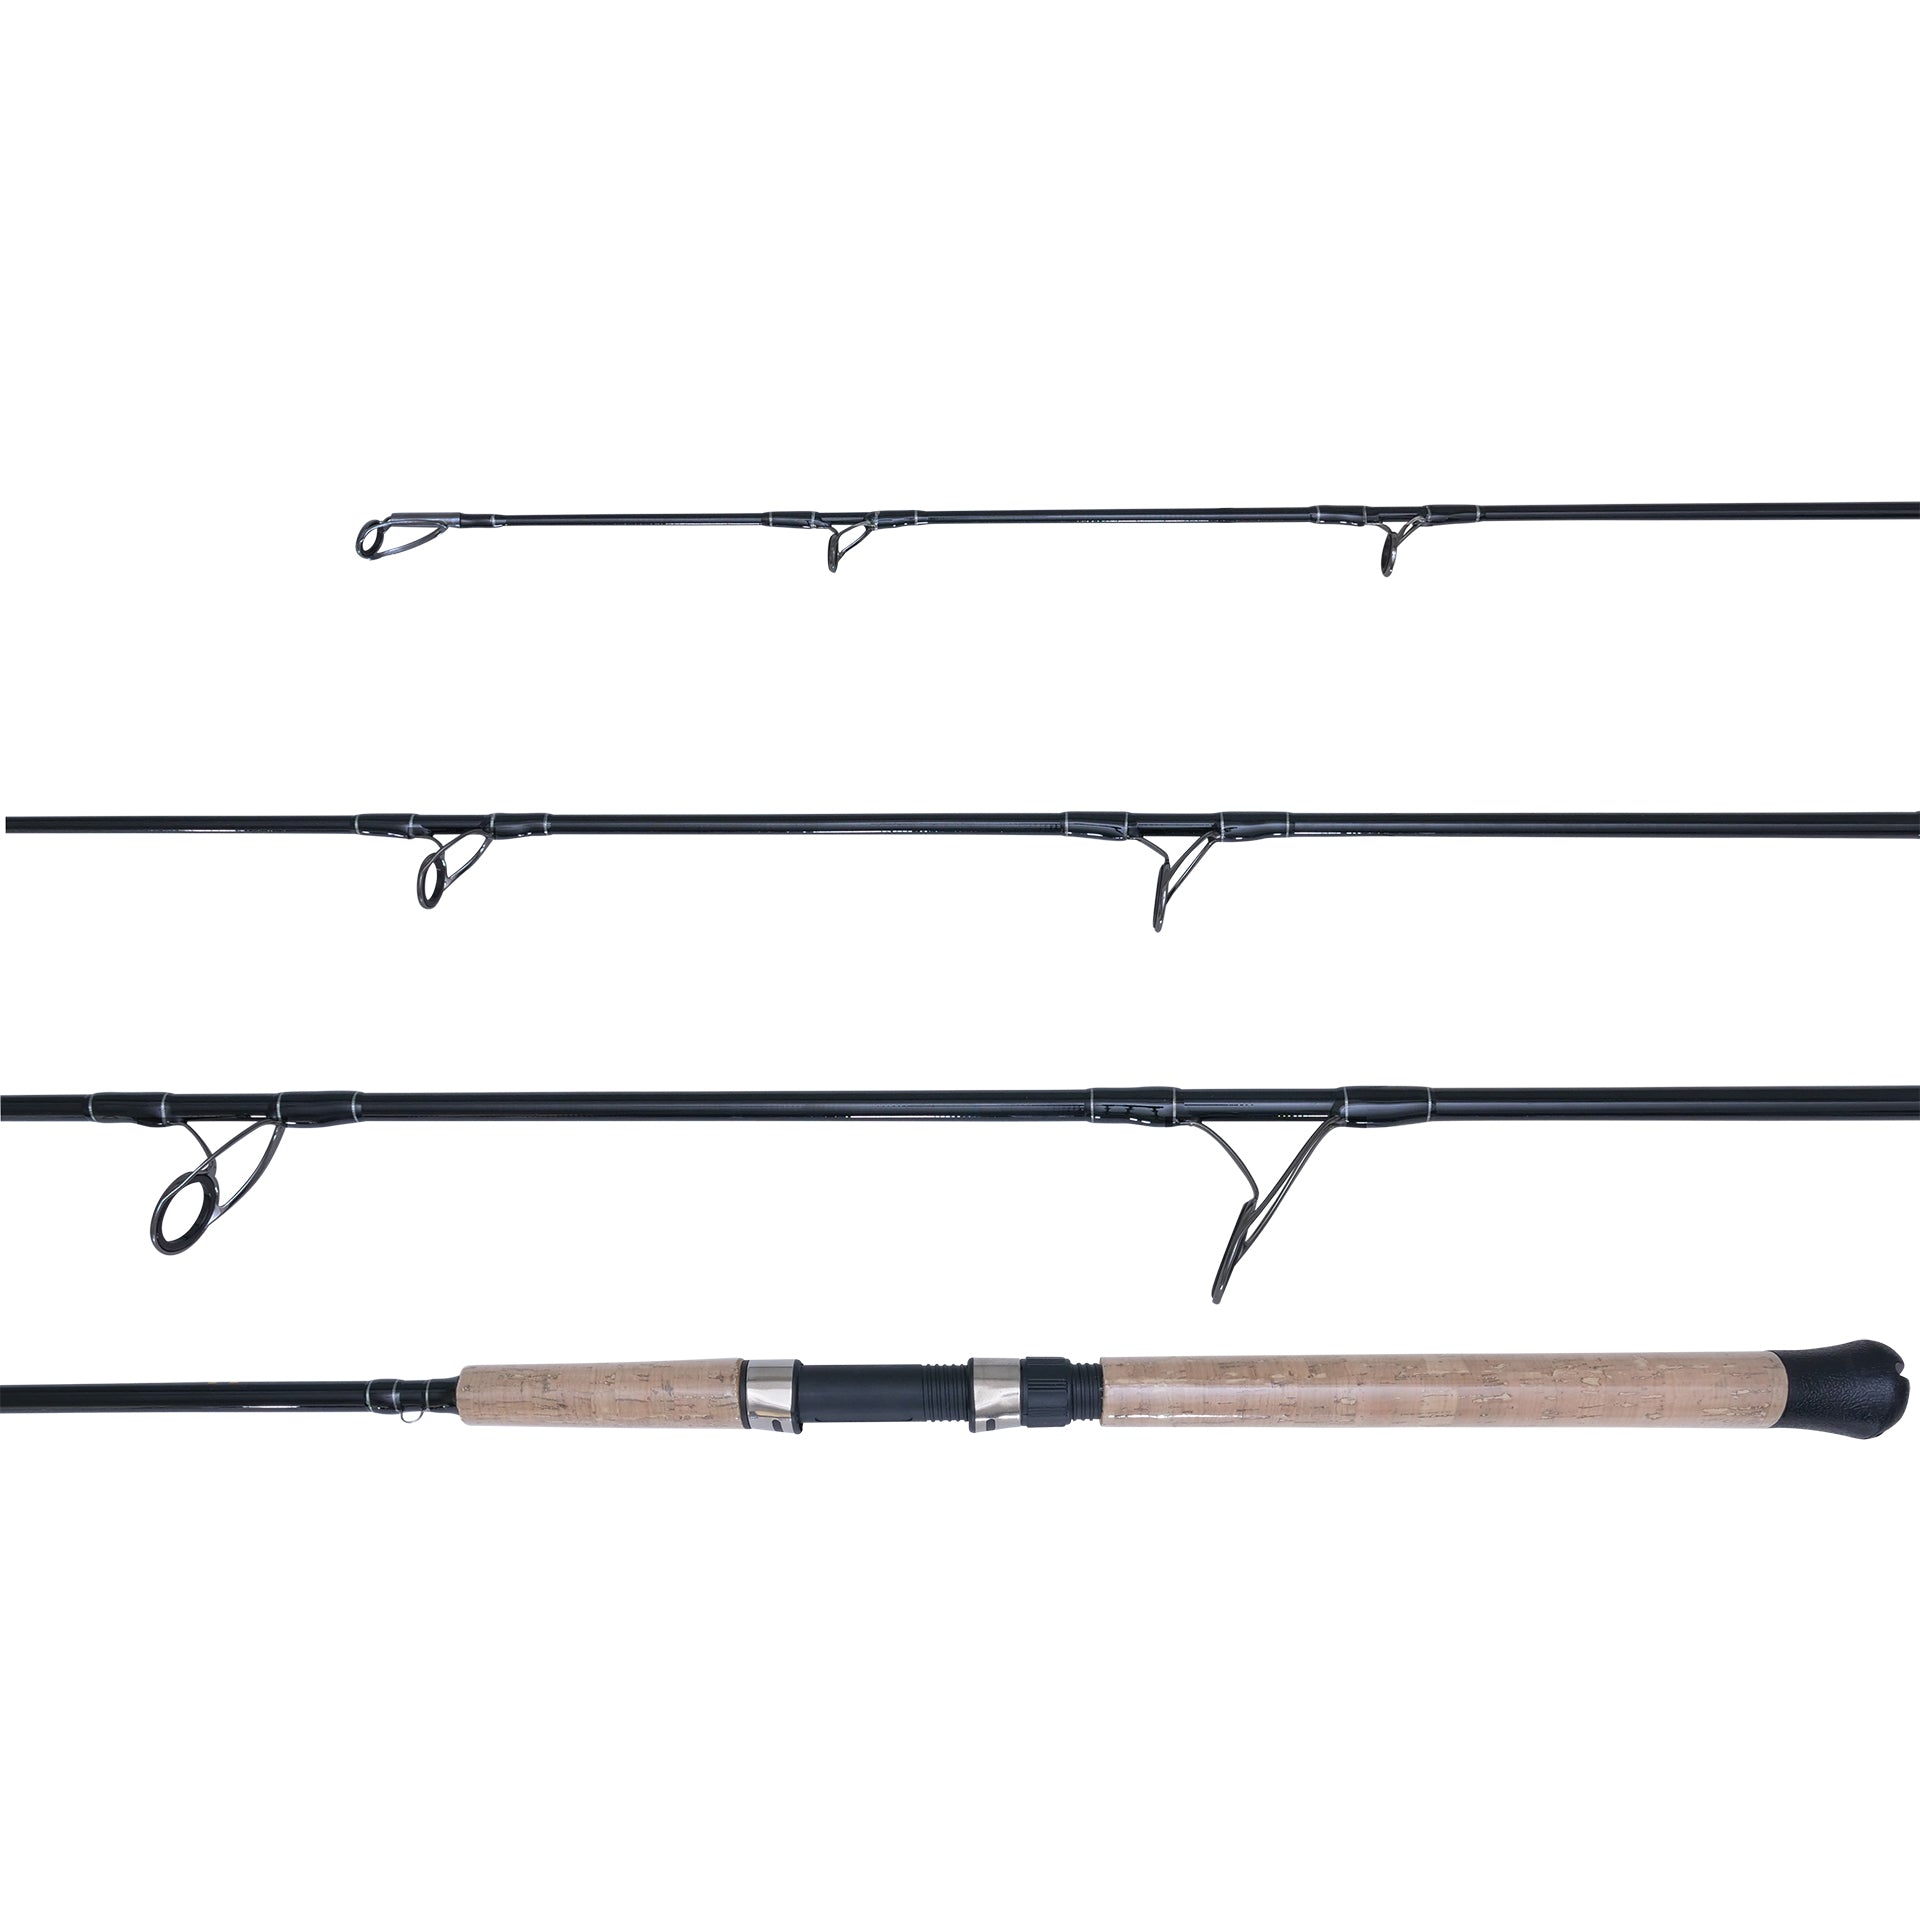 Buy H2O XPRESS Recon 7' Spinning Rod and Reel Combo Online at